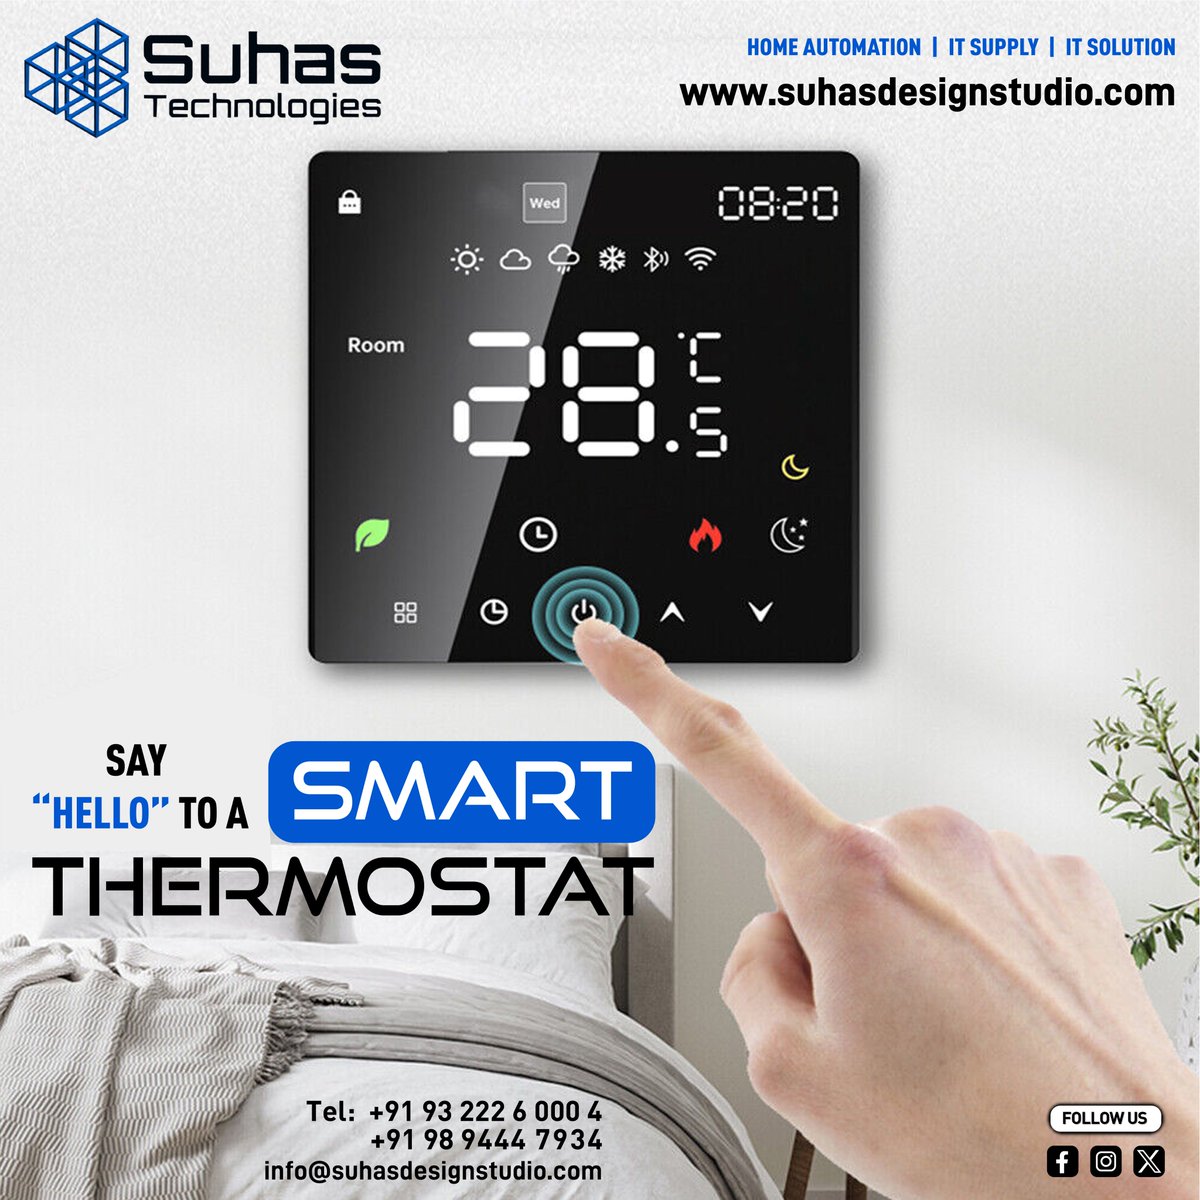 Modern #smartthermostat services are provided by Suhas Technologies, changing #comfort in homes!

Visit suhasdesignstudio.com

#SmartThermostats #Temperature #SmartHome #Automation #Convenience #SmartDoors #DoorLocks #Innovation #SuhasTechnologies #TechSavvy #HomeAutomation